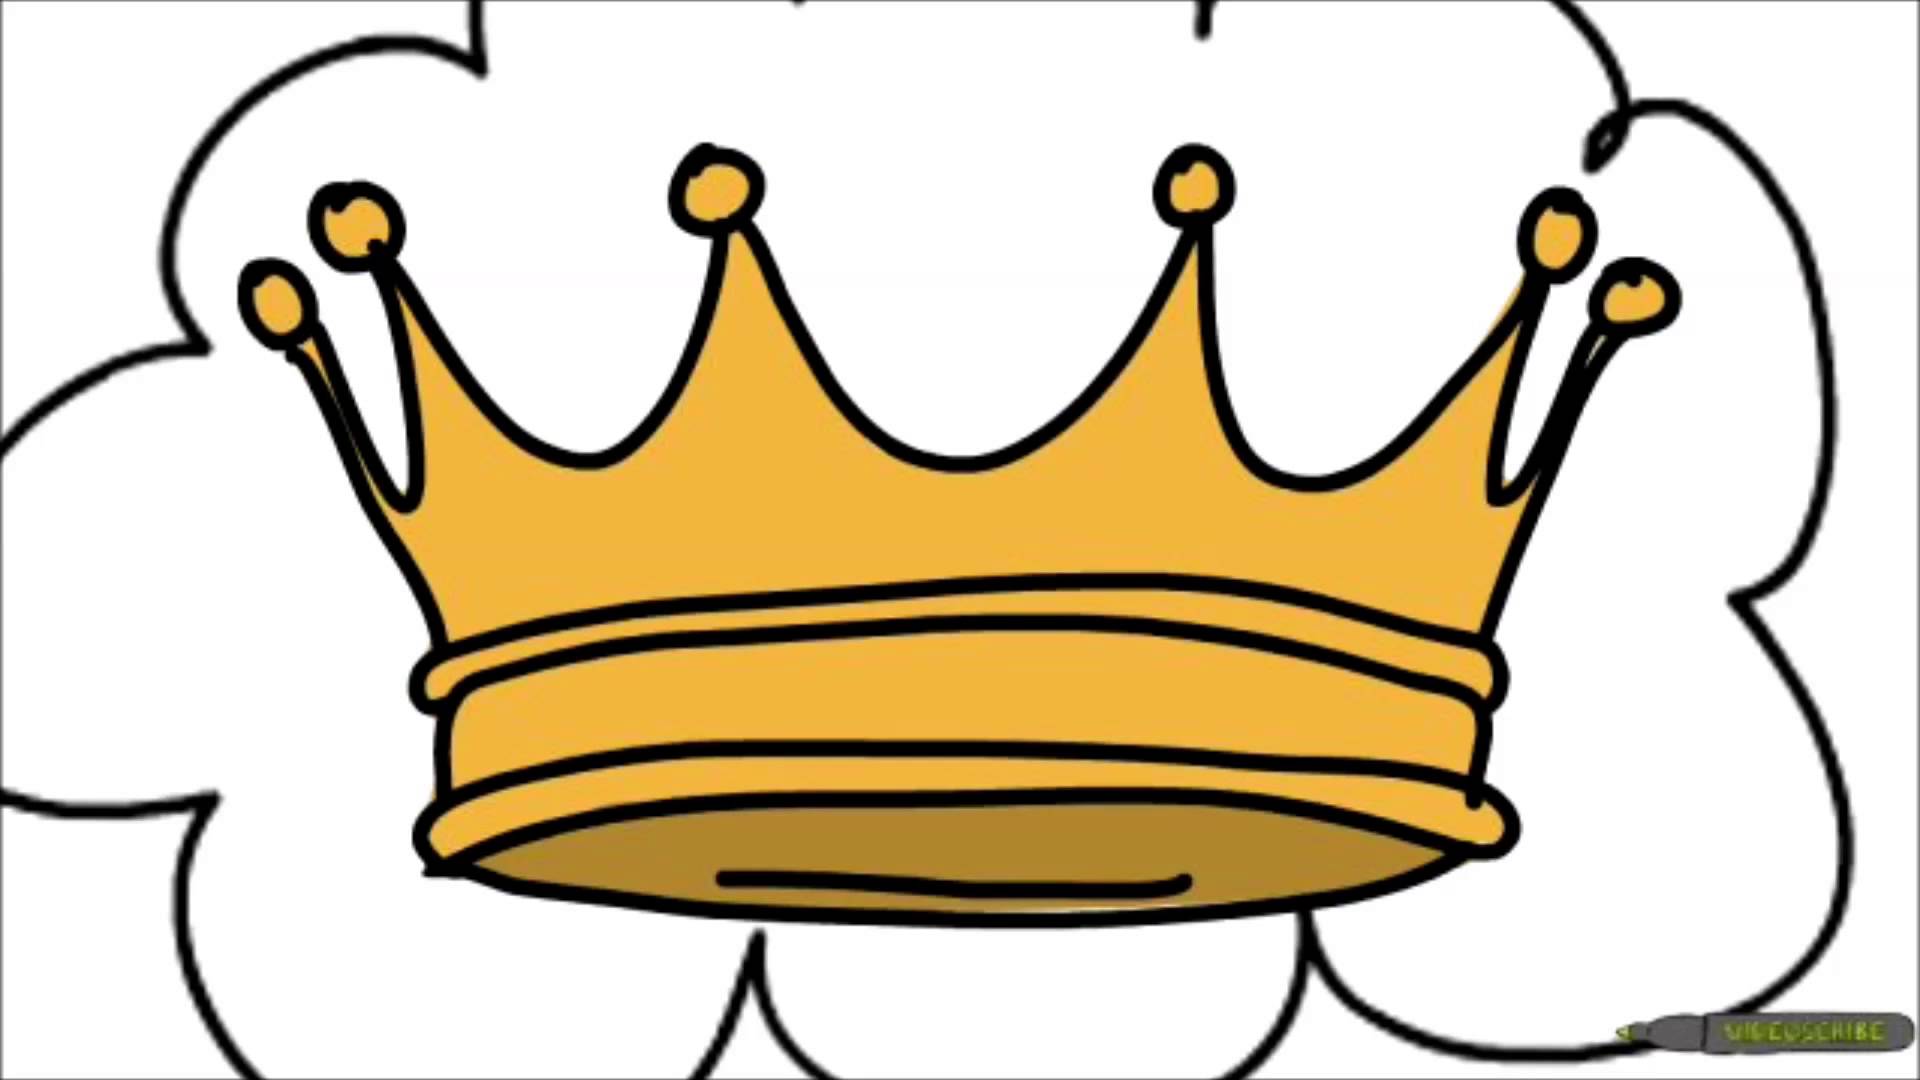 Simple Cartoon Crown Drawing : Draw a line for the base of the crown